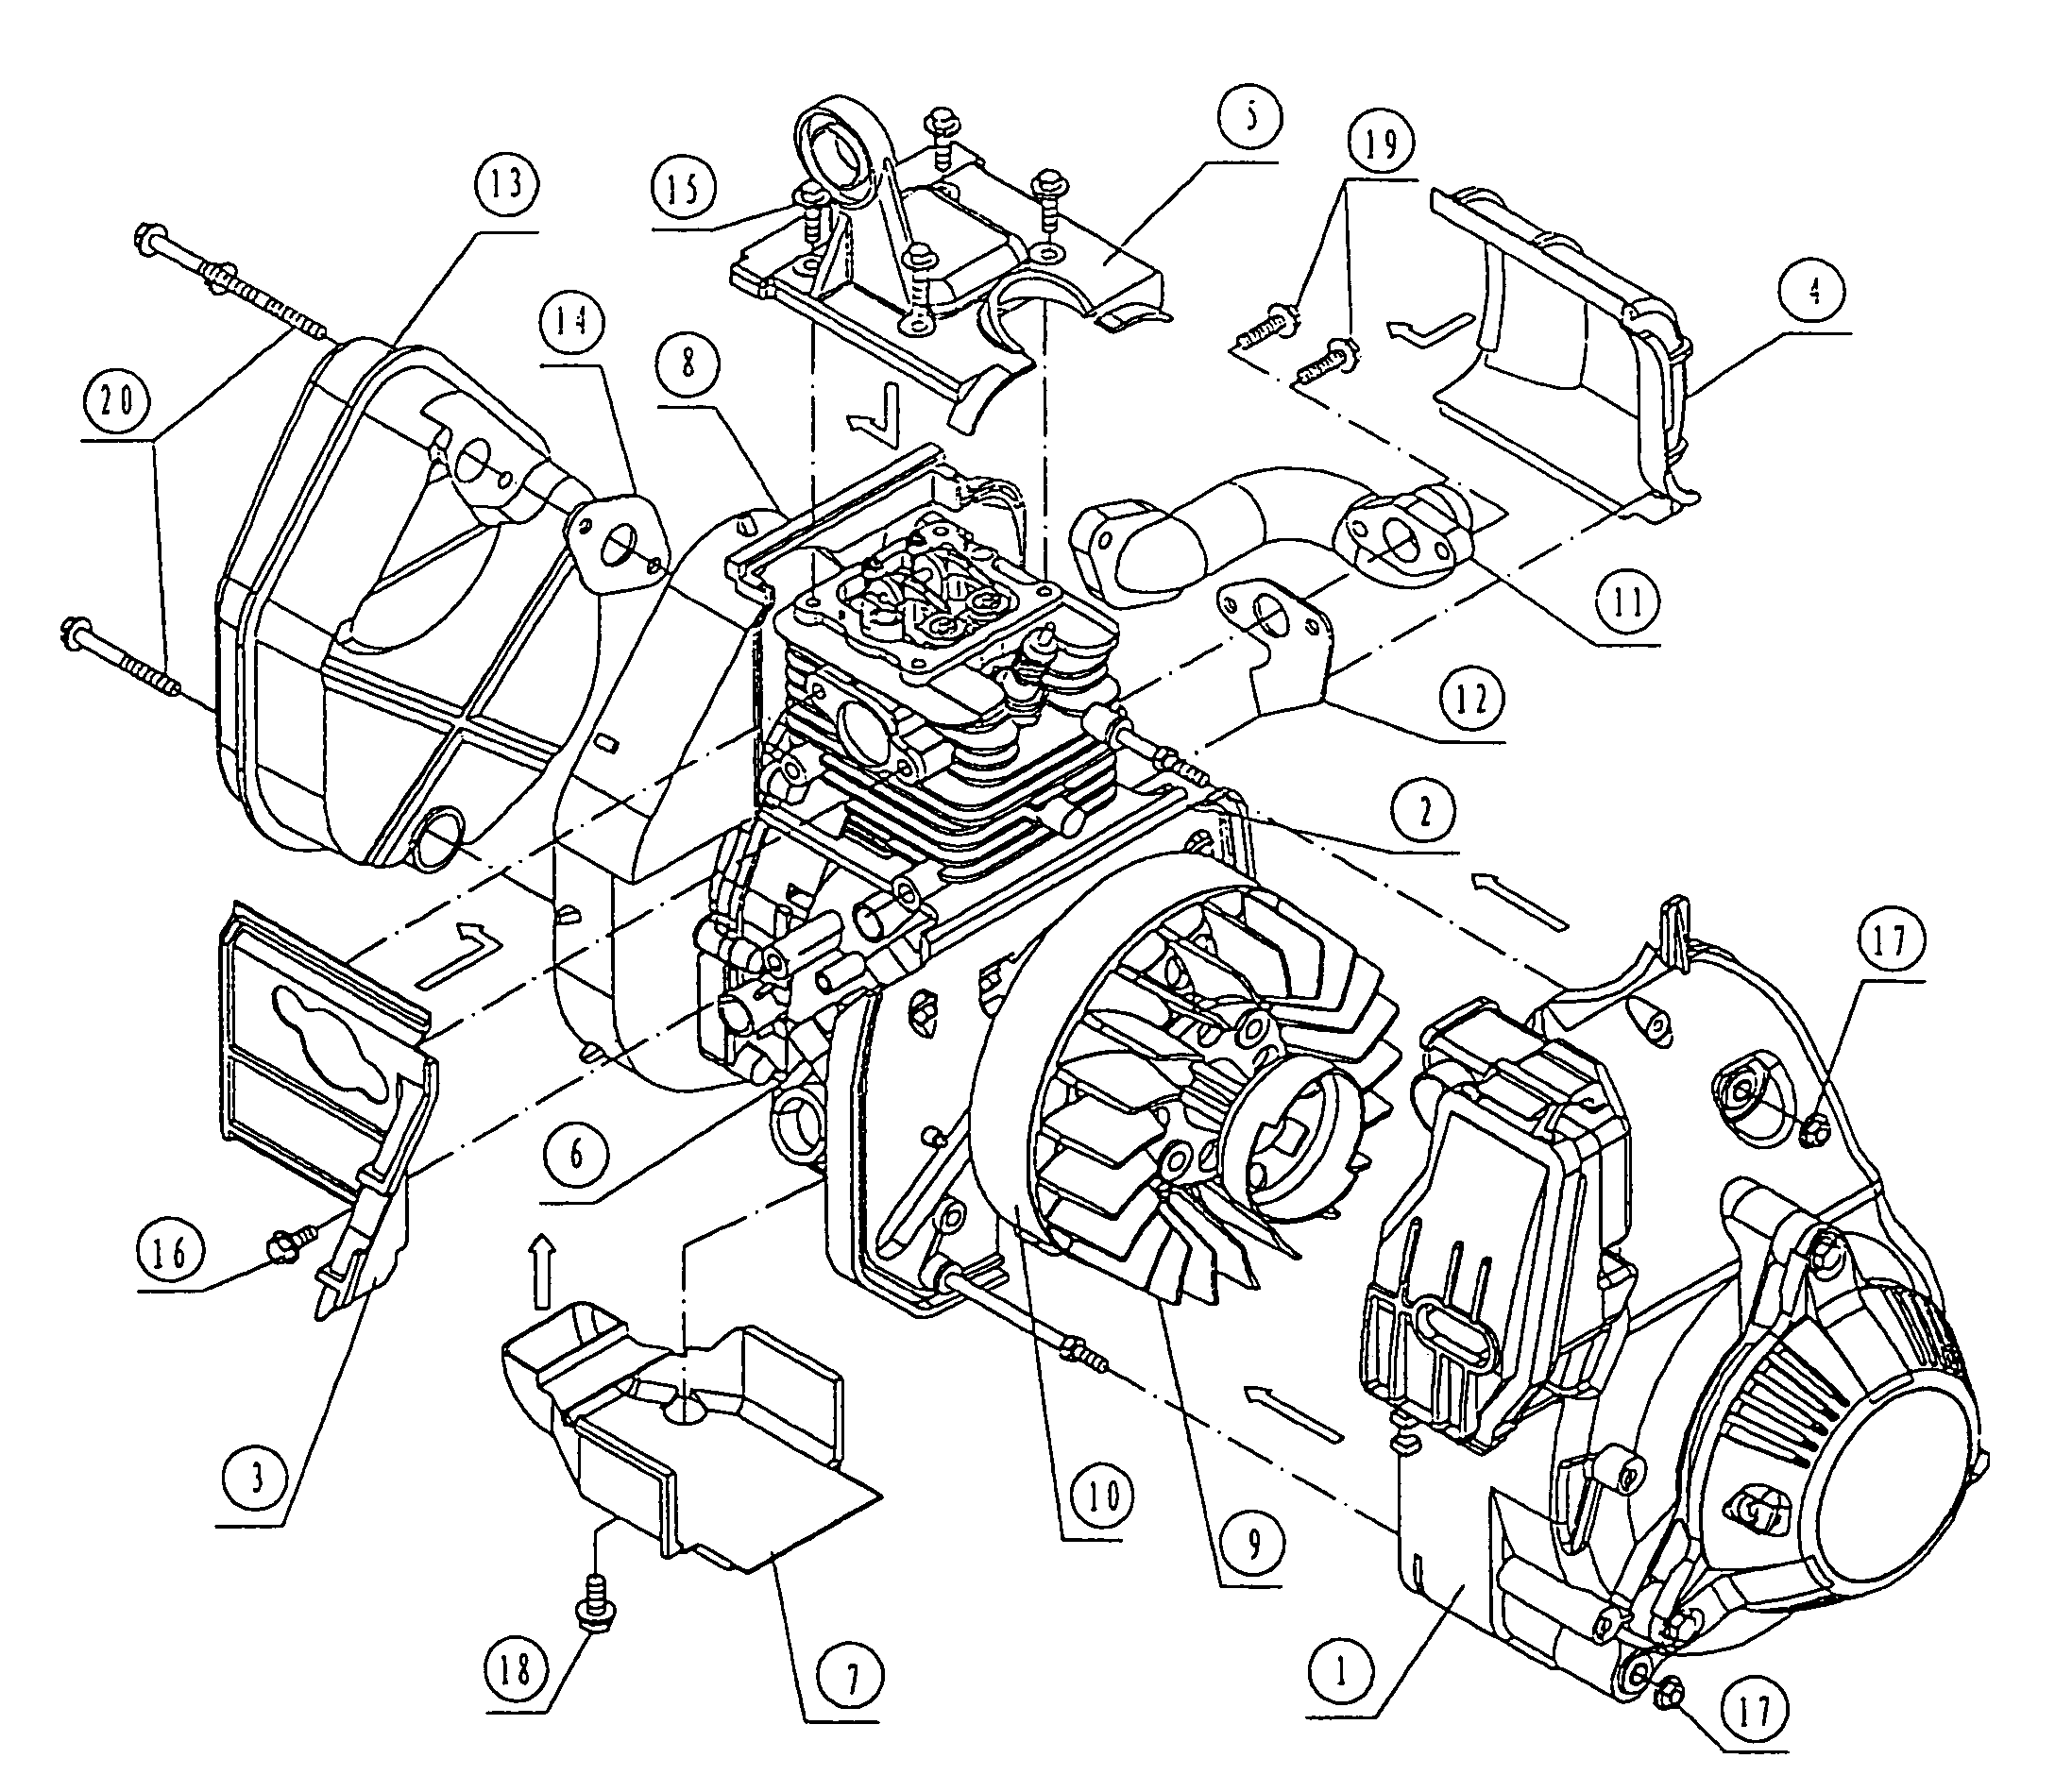 Cooling system of an engine for the inside of a generator